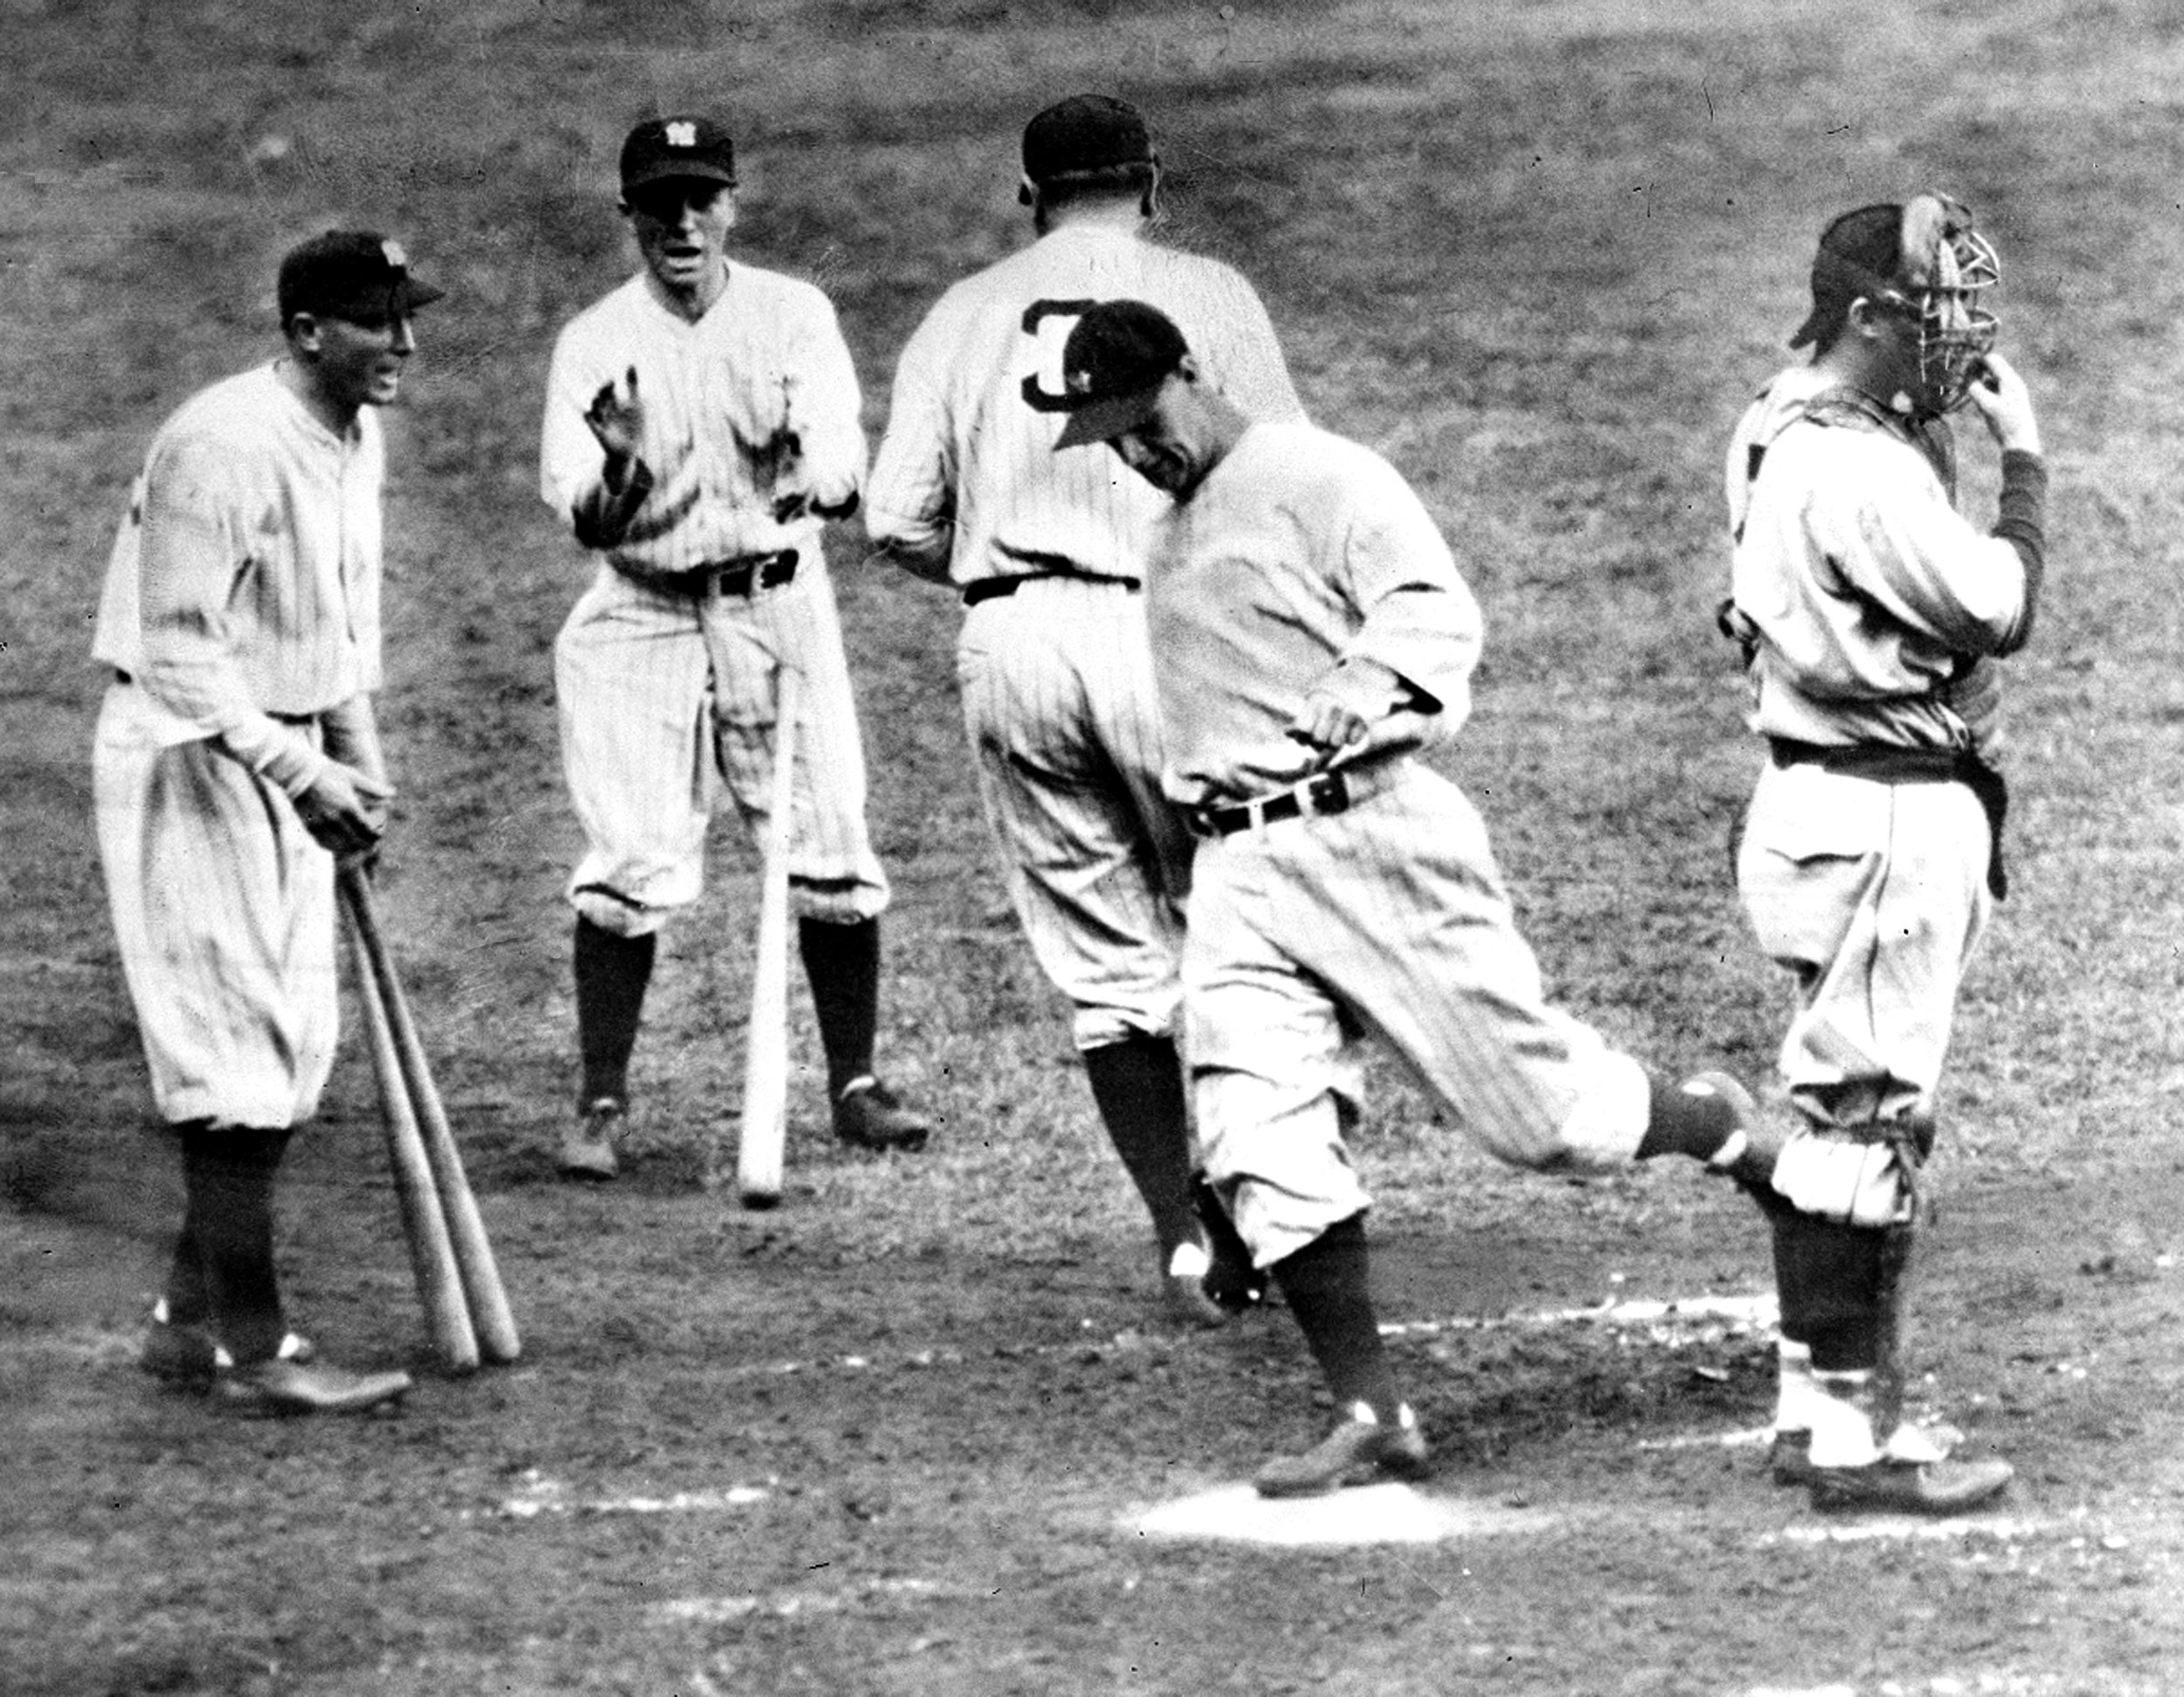  Lou Gehrig crosses home plate behind Babe Ruth, walking to dugout, after scoring the first home run of the 1932 World Series game with two on in the fourth inning at Yankee Stadium in New York City, Sept. 28.  The homerun gave the New York Yankees t